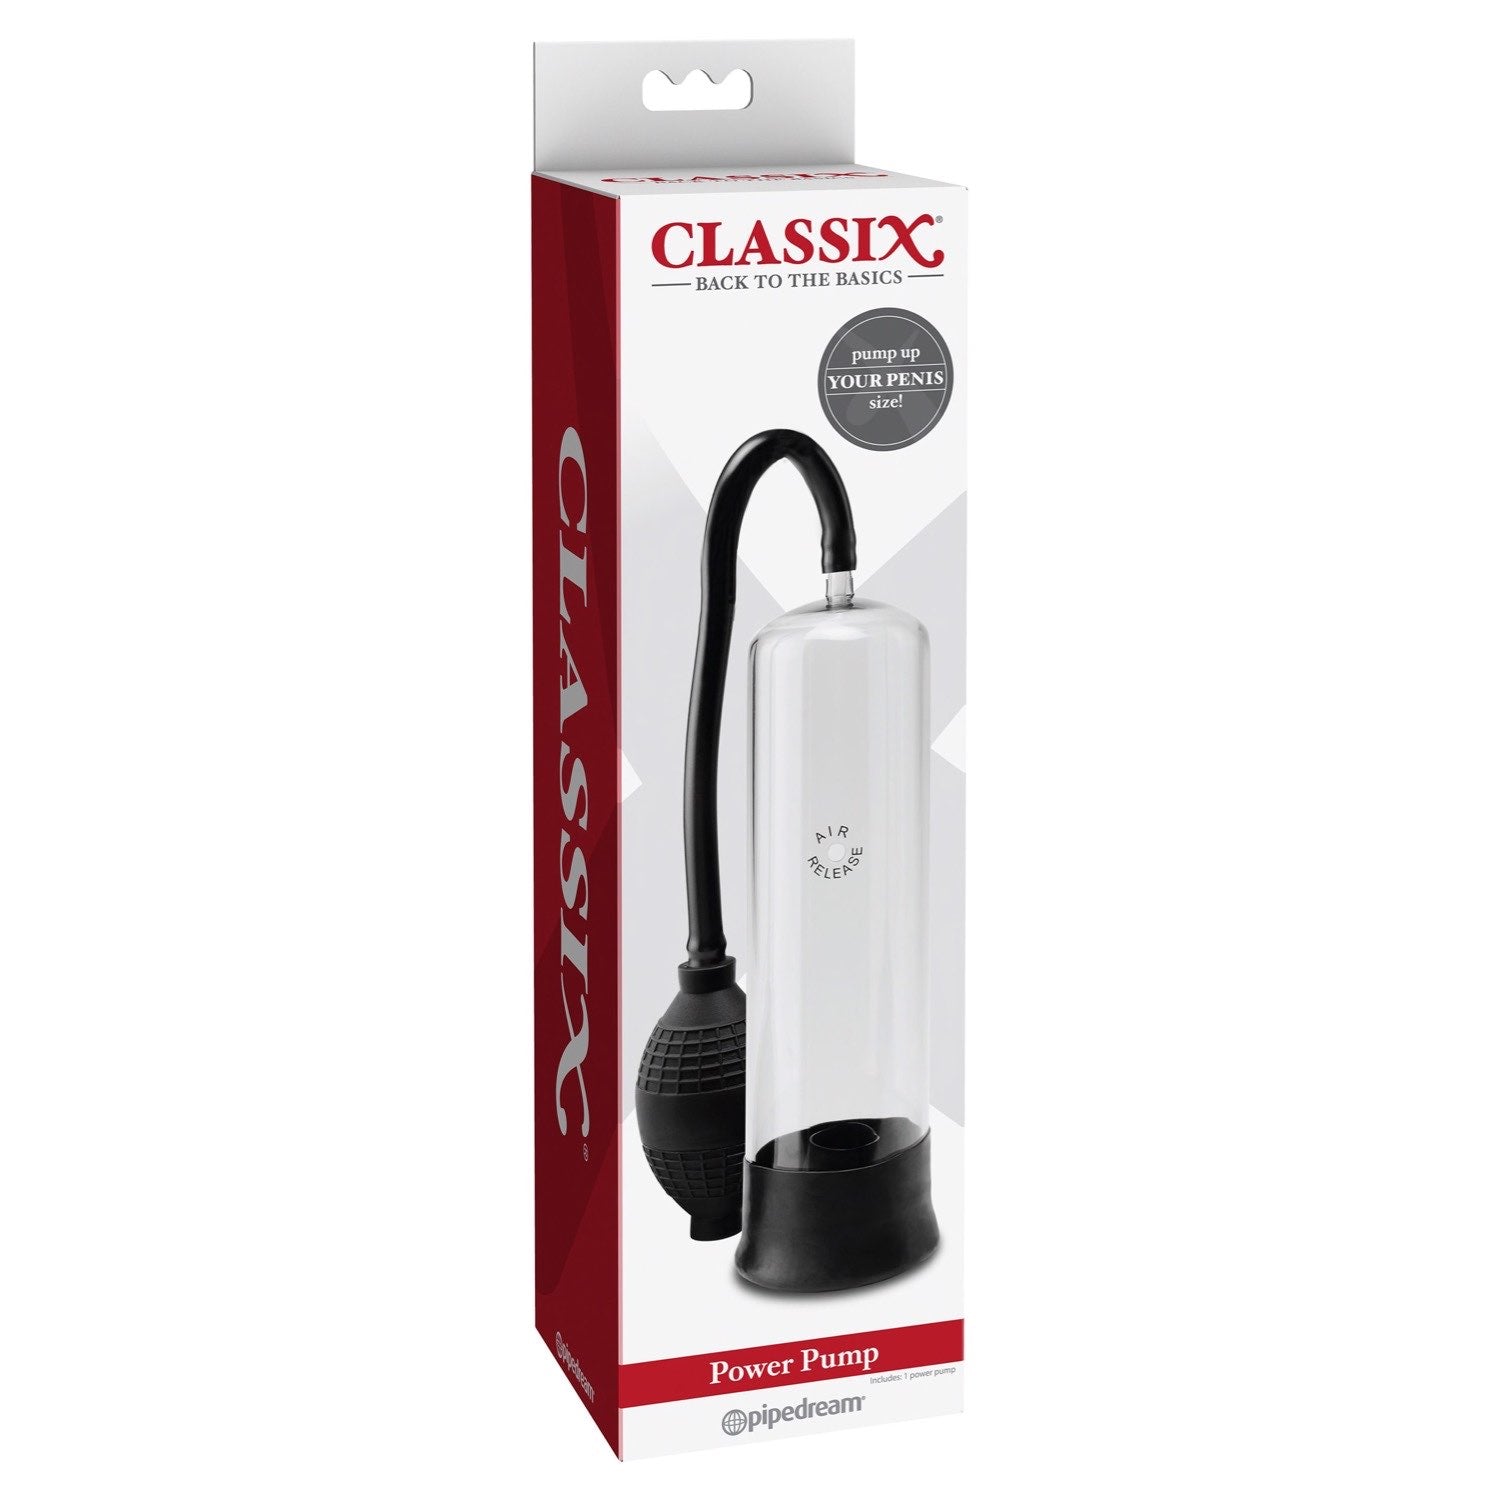 Classix Power Pump - Clear Penis Pump by Pipedream